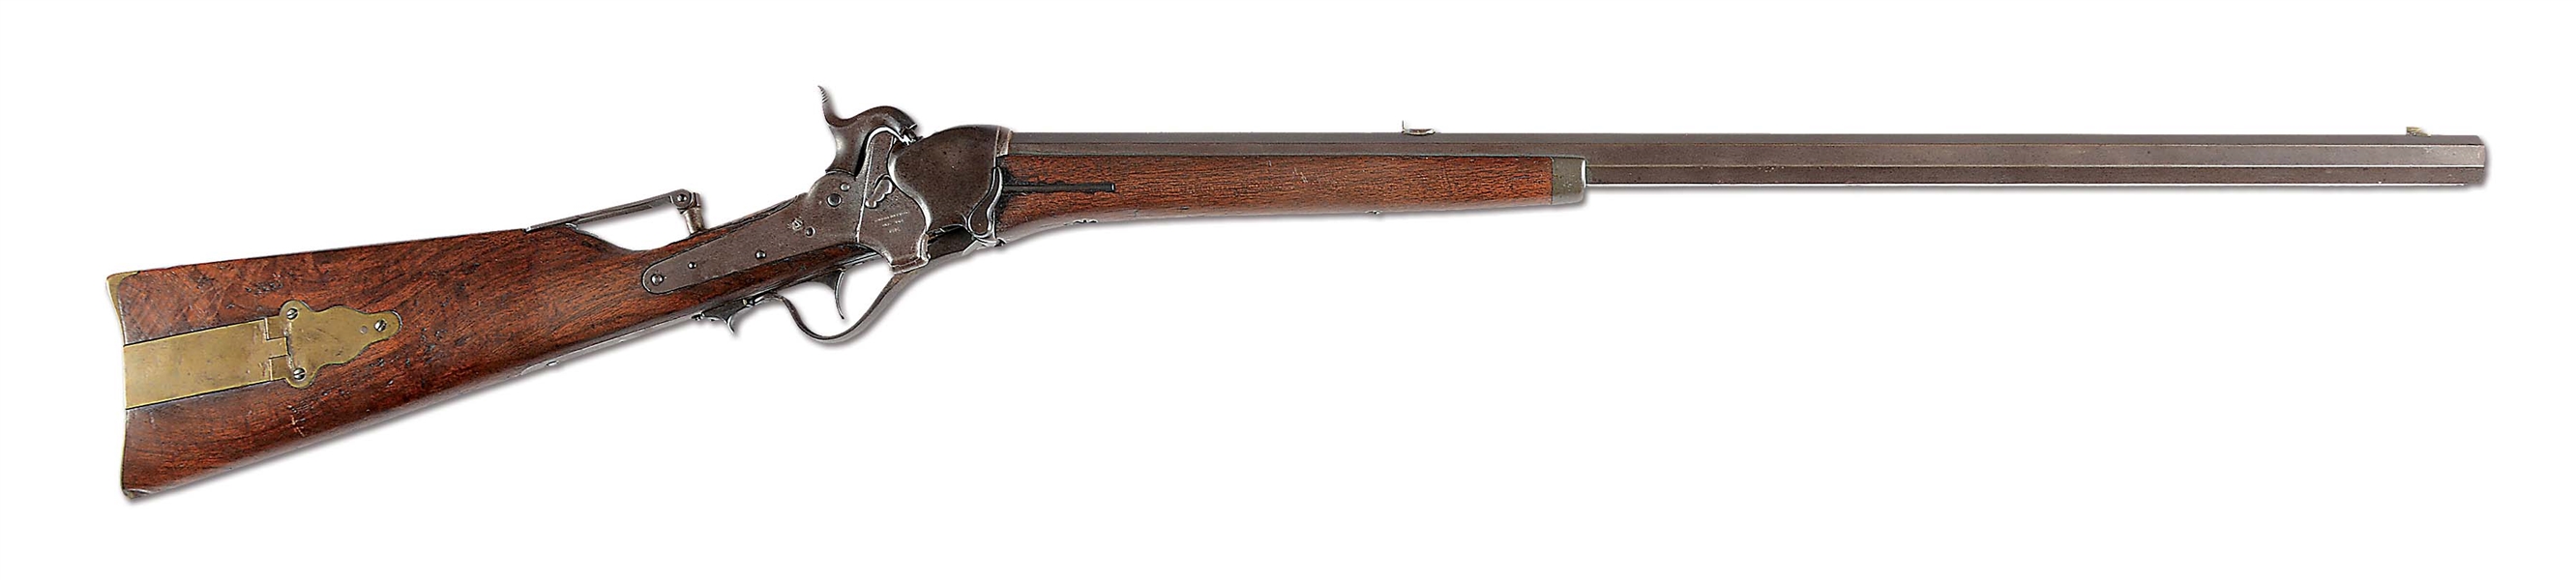 (A) SHARPS MODEL 1851 PERCUSSION SPORTING RIFLE.